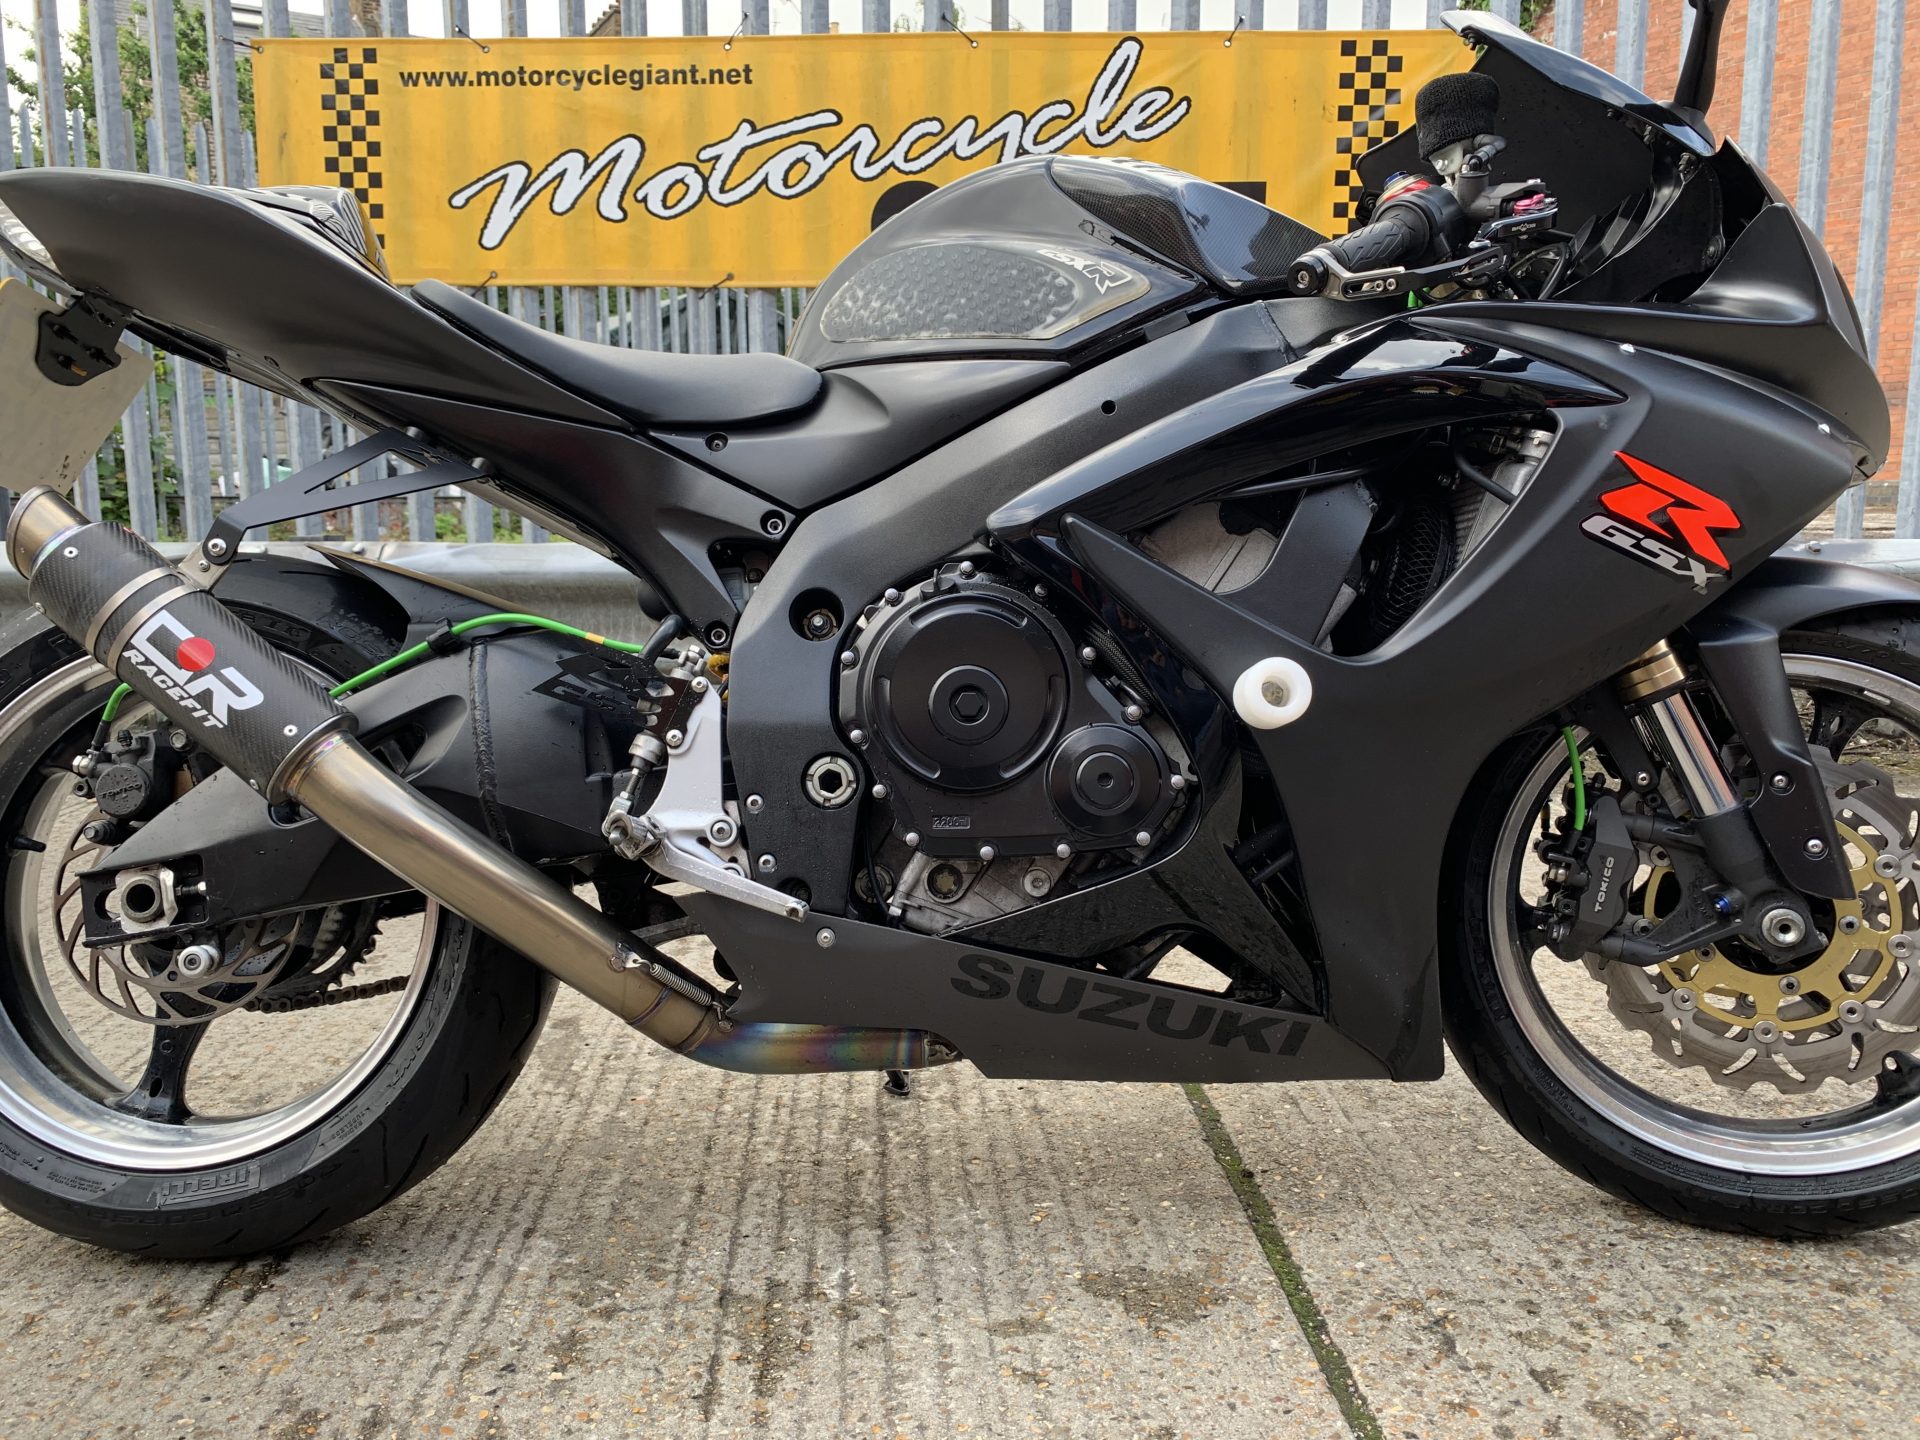 SUZUKI GSXR 600 – Motorcycle Giant – West London Motorcycle & Scooter